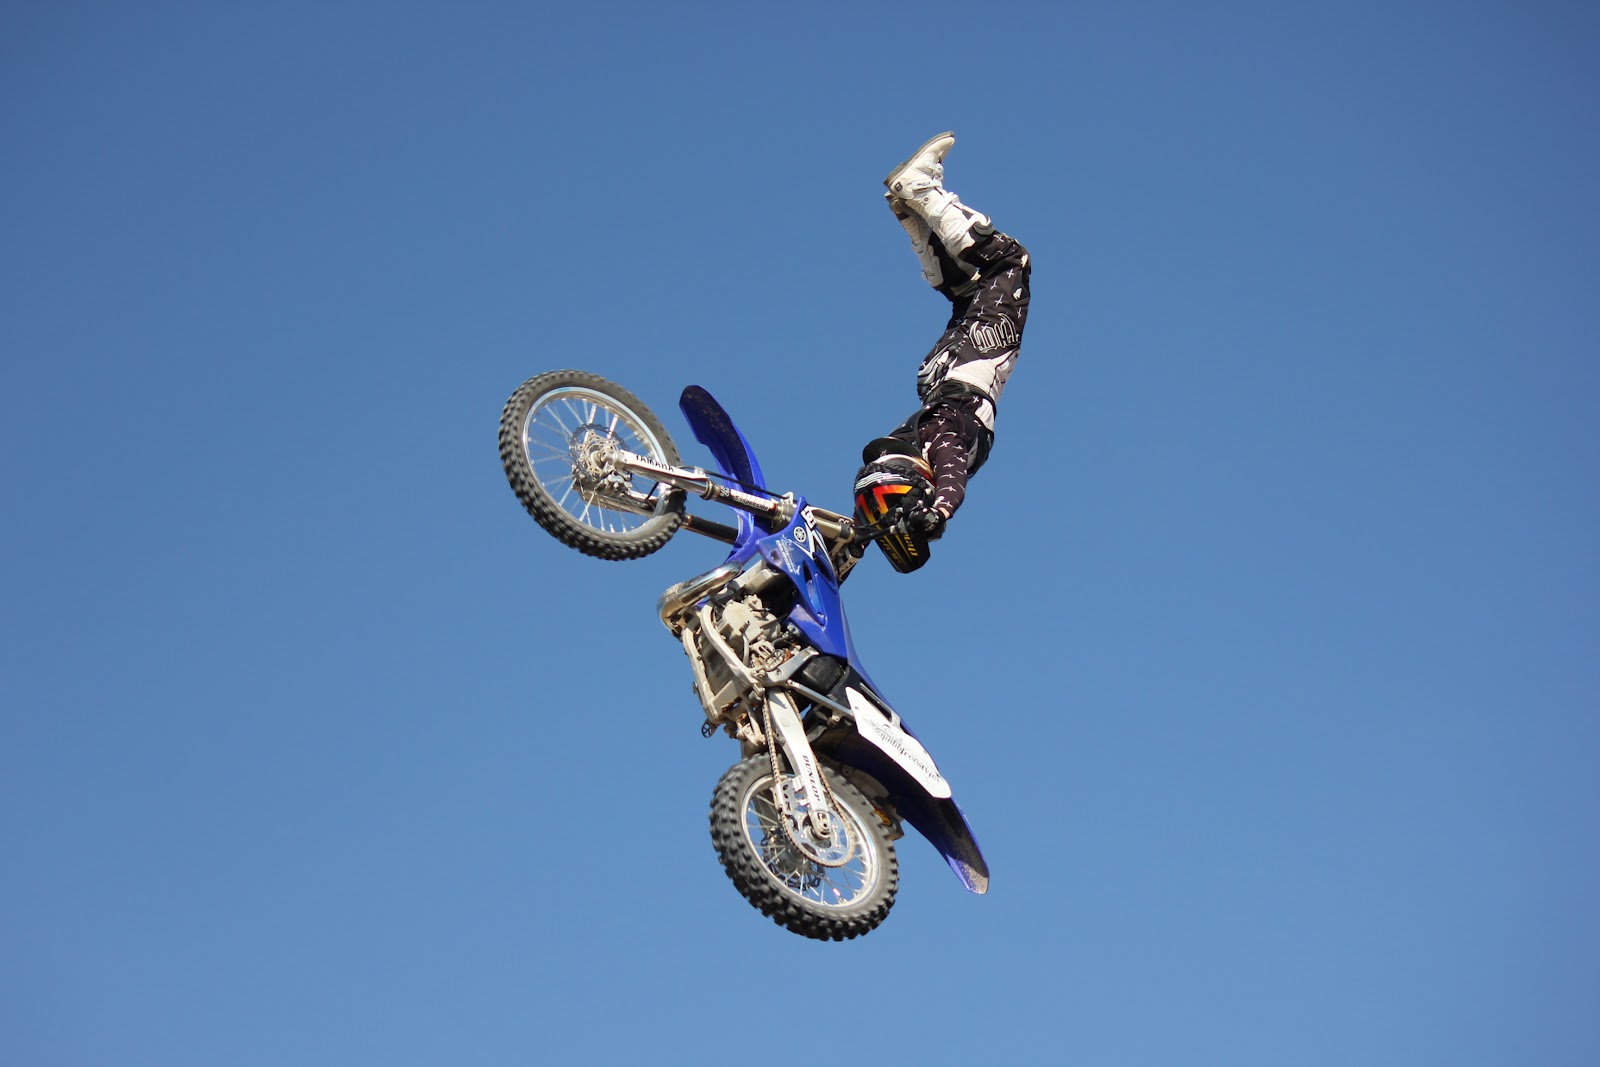 Dialed Action FMX (Freestyle Motocross) Stunt Show — Variety Attractions